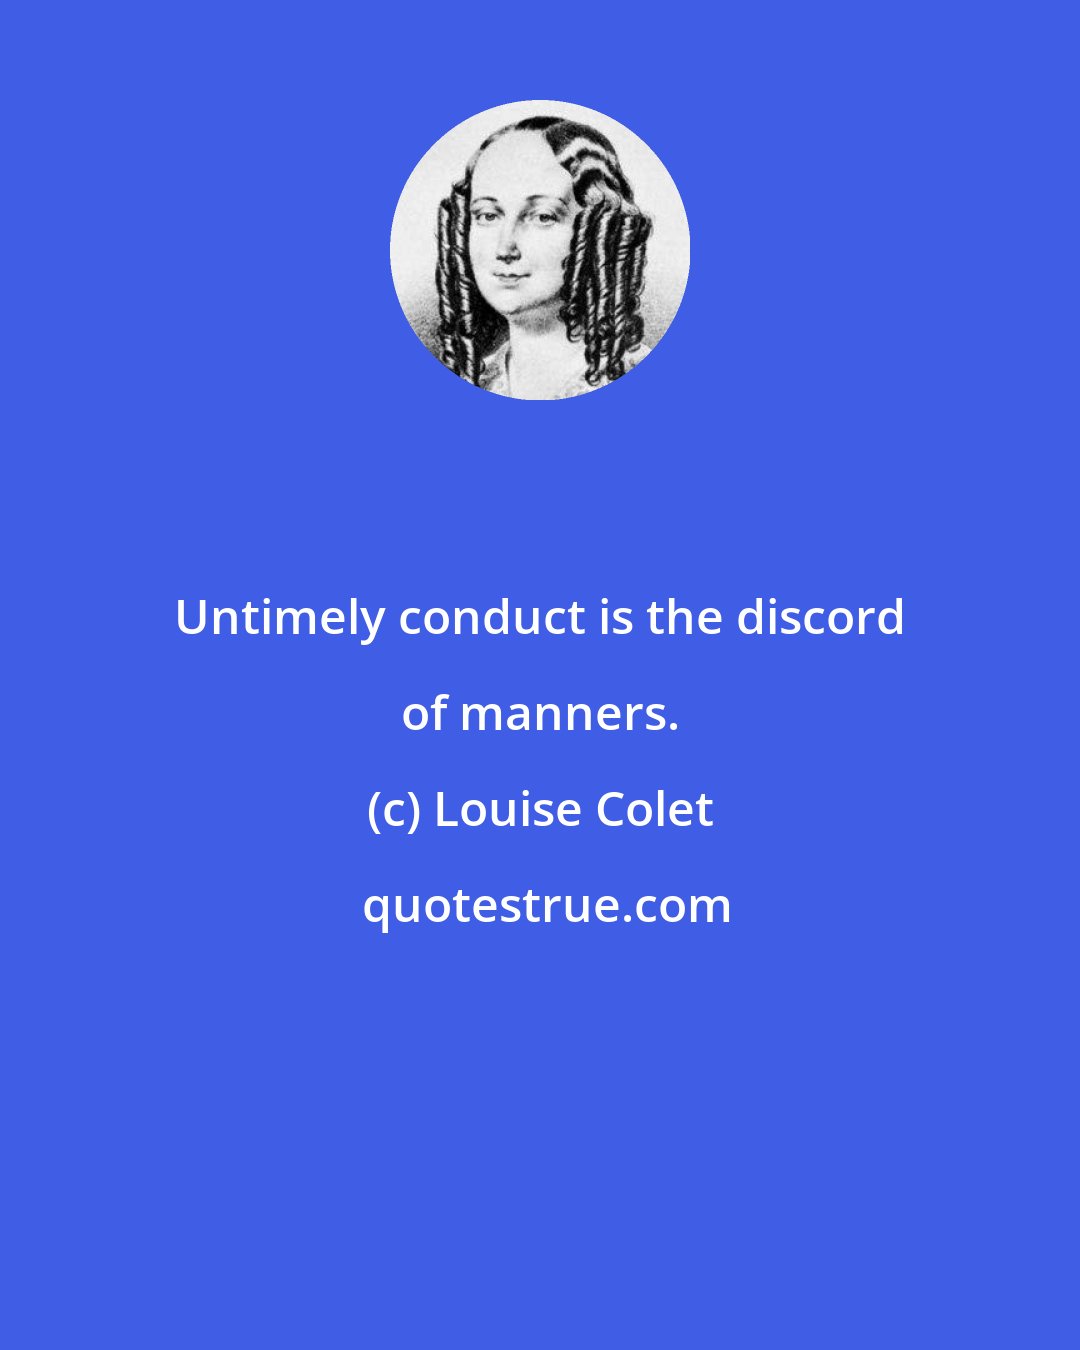 Louise Colet: Untimely conduct is the discord of manners.